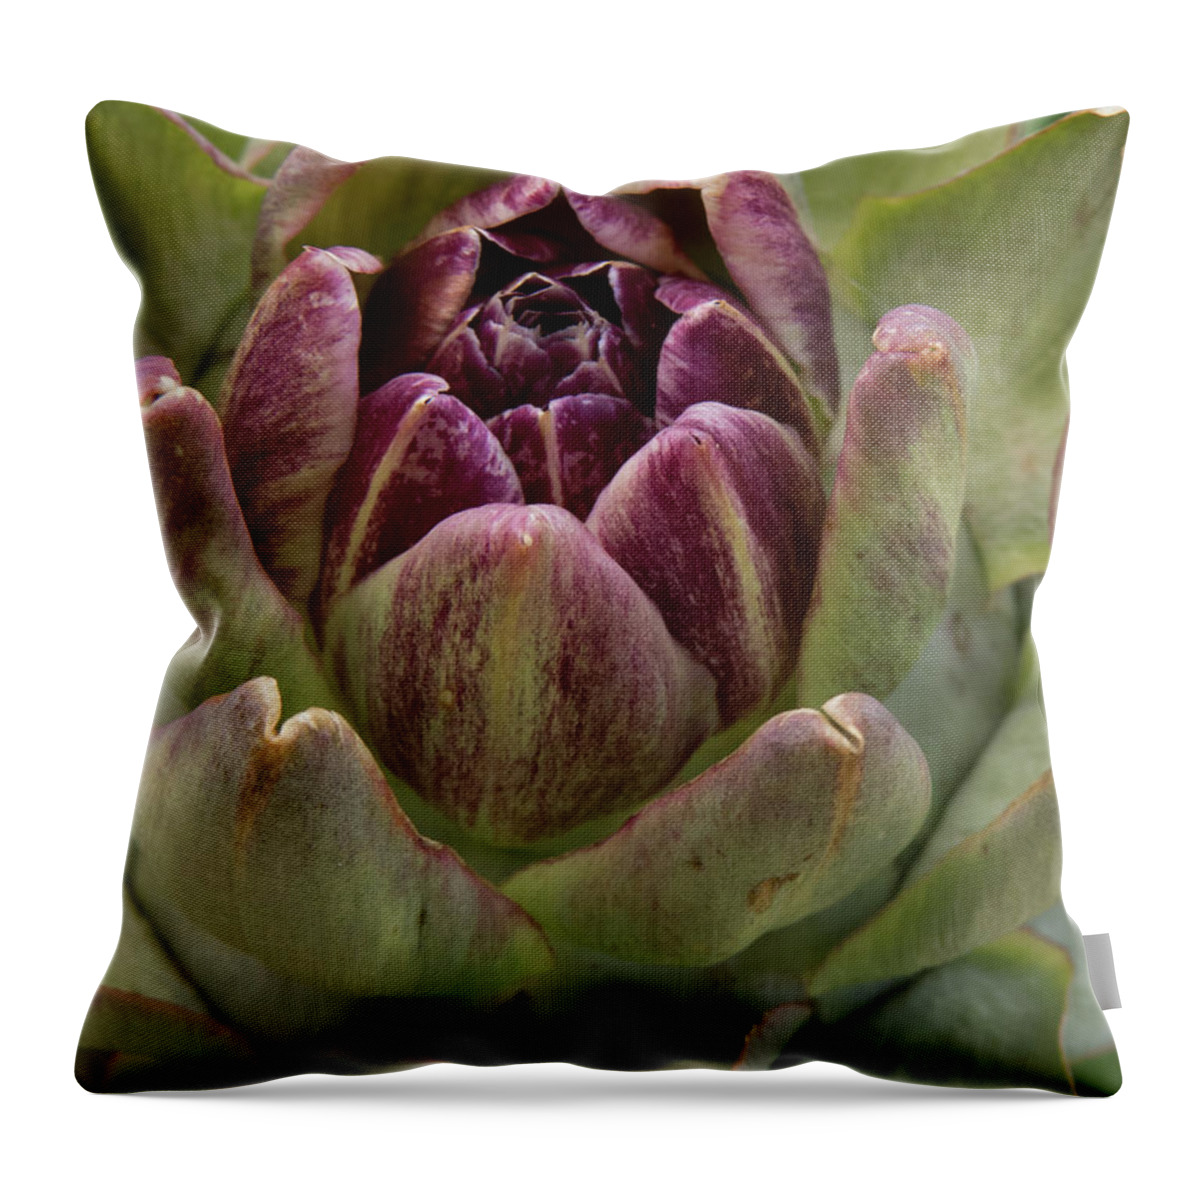 Artichoke Throw Pillow featuring the photograph Artichoke Plant by Christy Garavetto